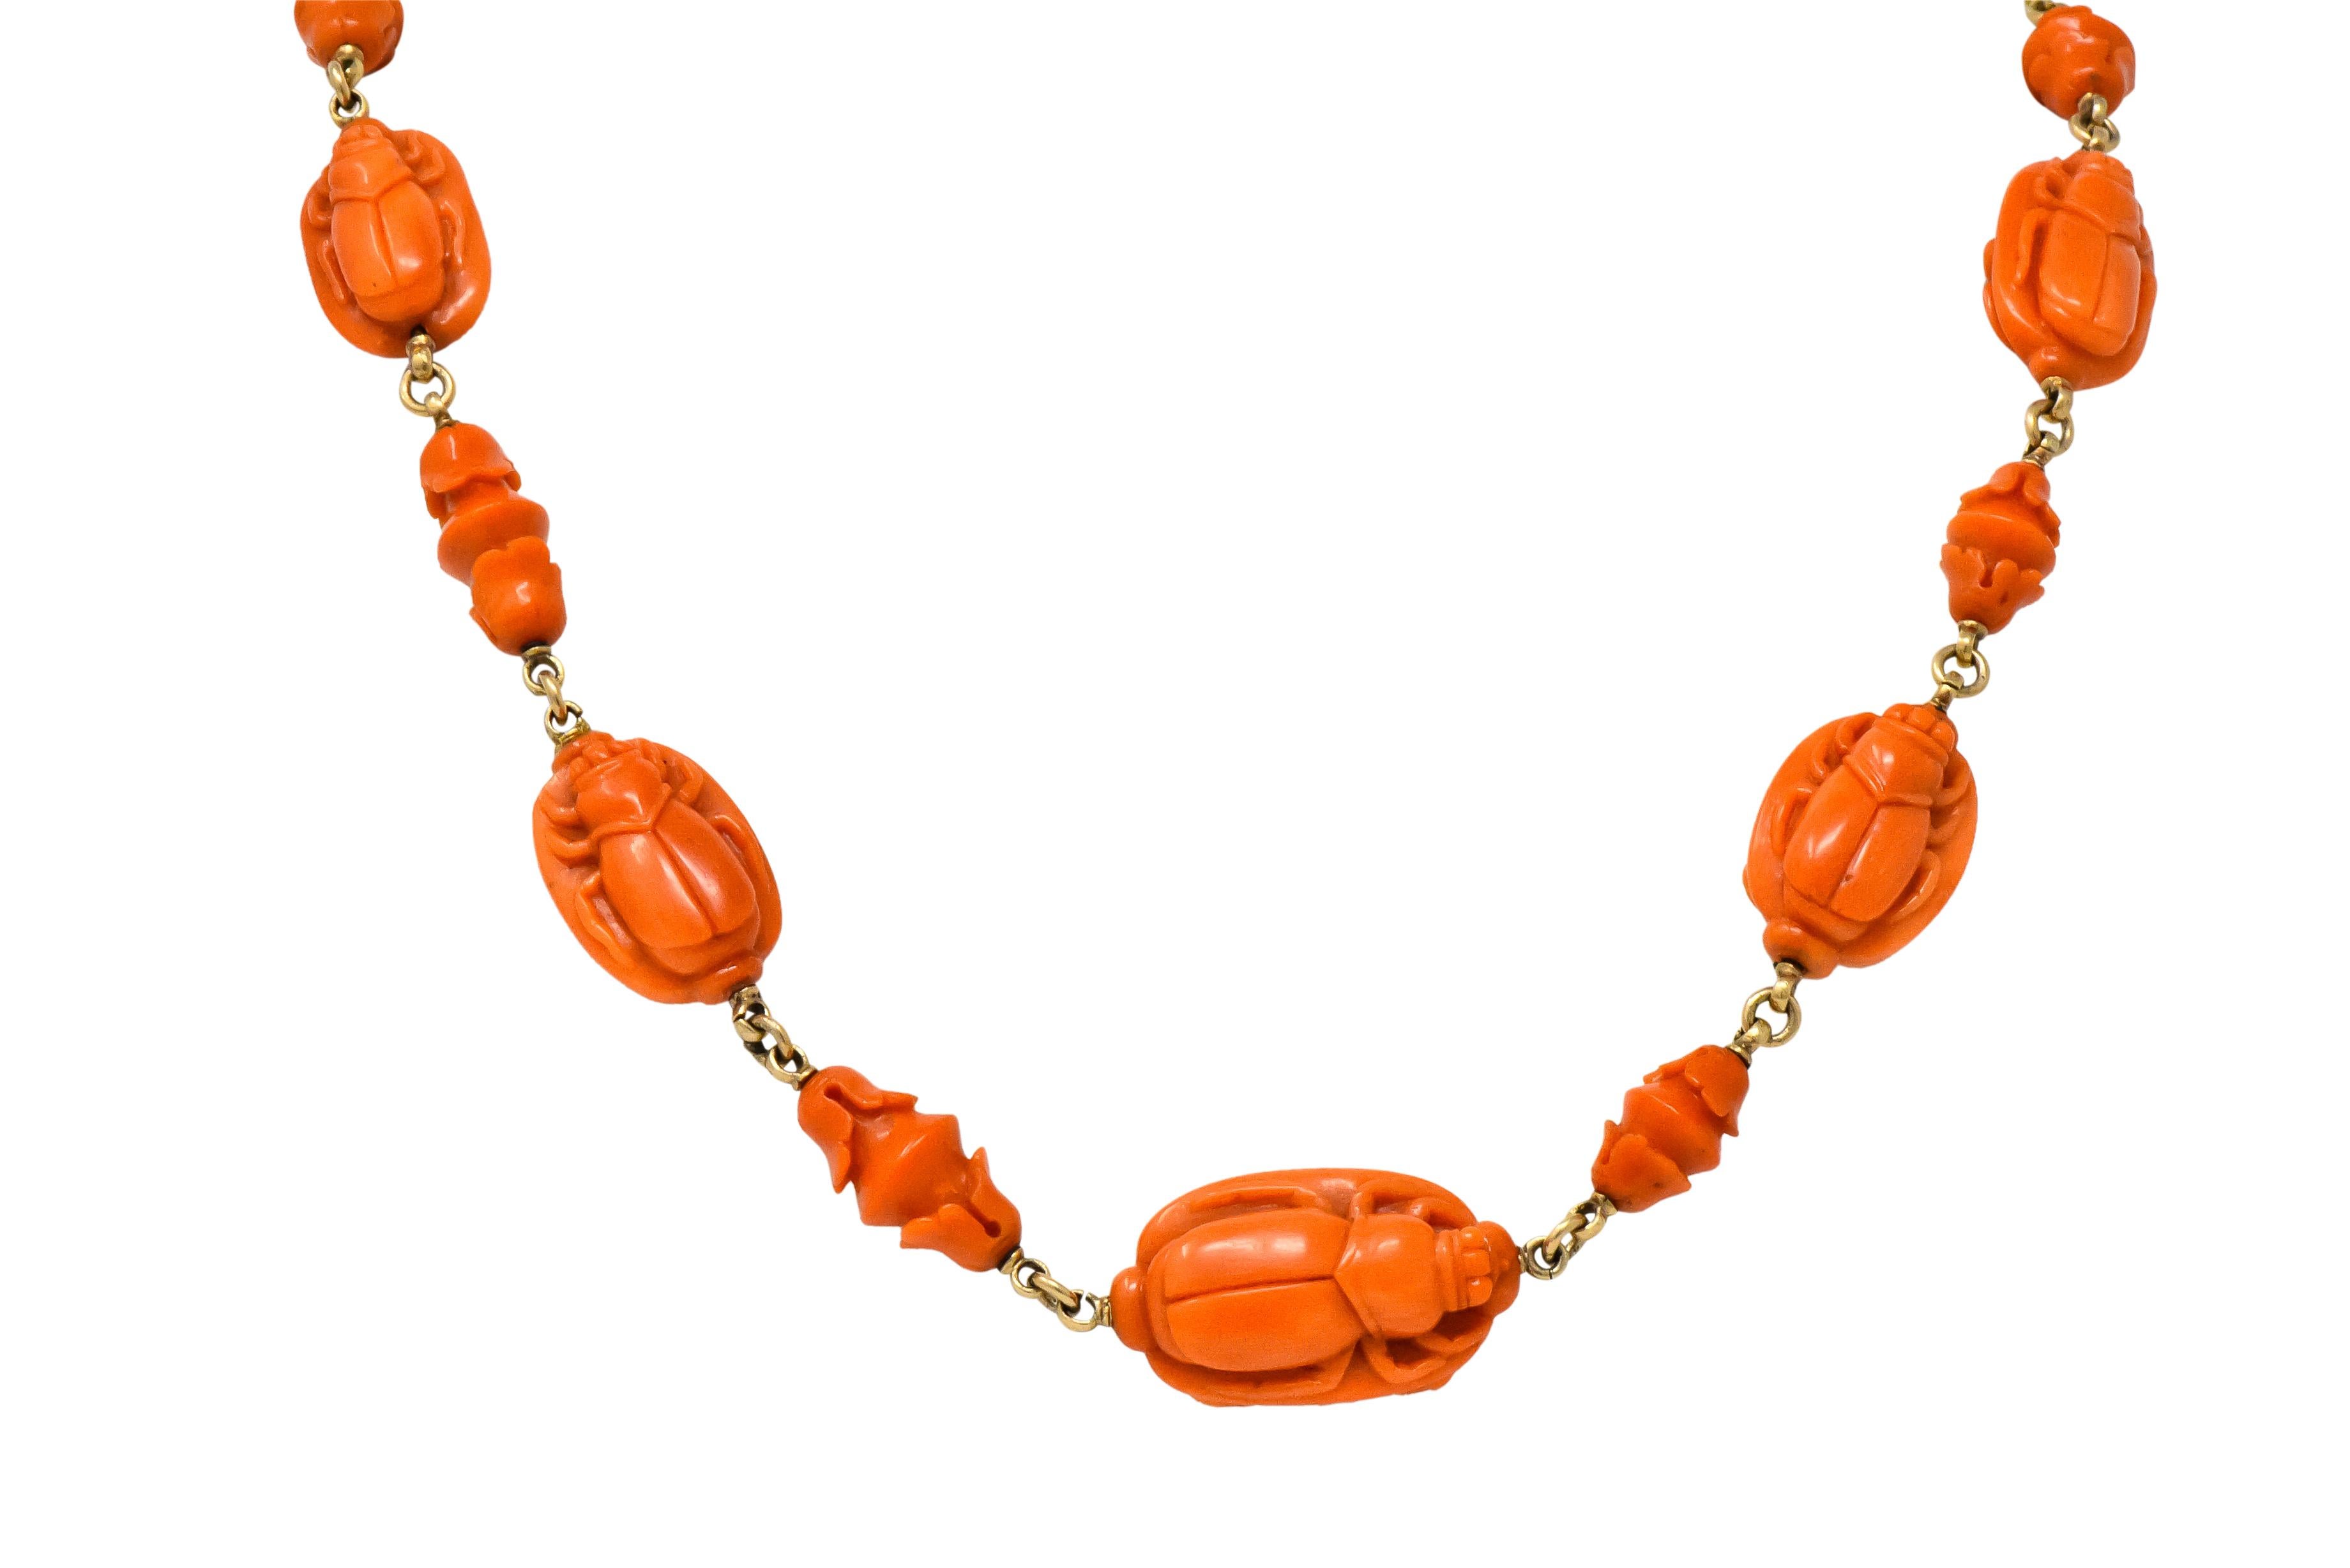 With graduated deeply carved coral beads, one side features a scarab beetle and the other a butterfly, largest bead measuring approximately 1 x 5/8 Inch

Carved coral lotus flower spacer links

Bright orange, highly detailed and very well matched